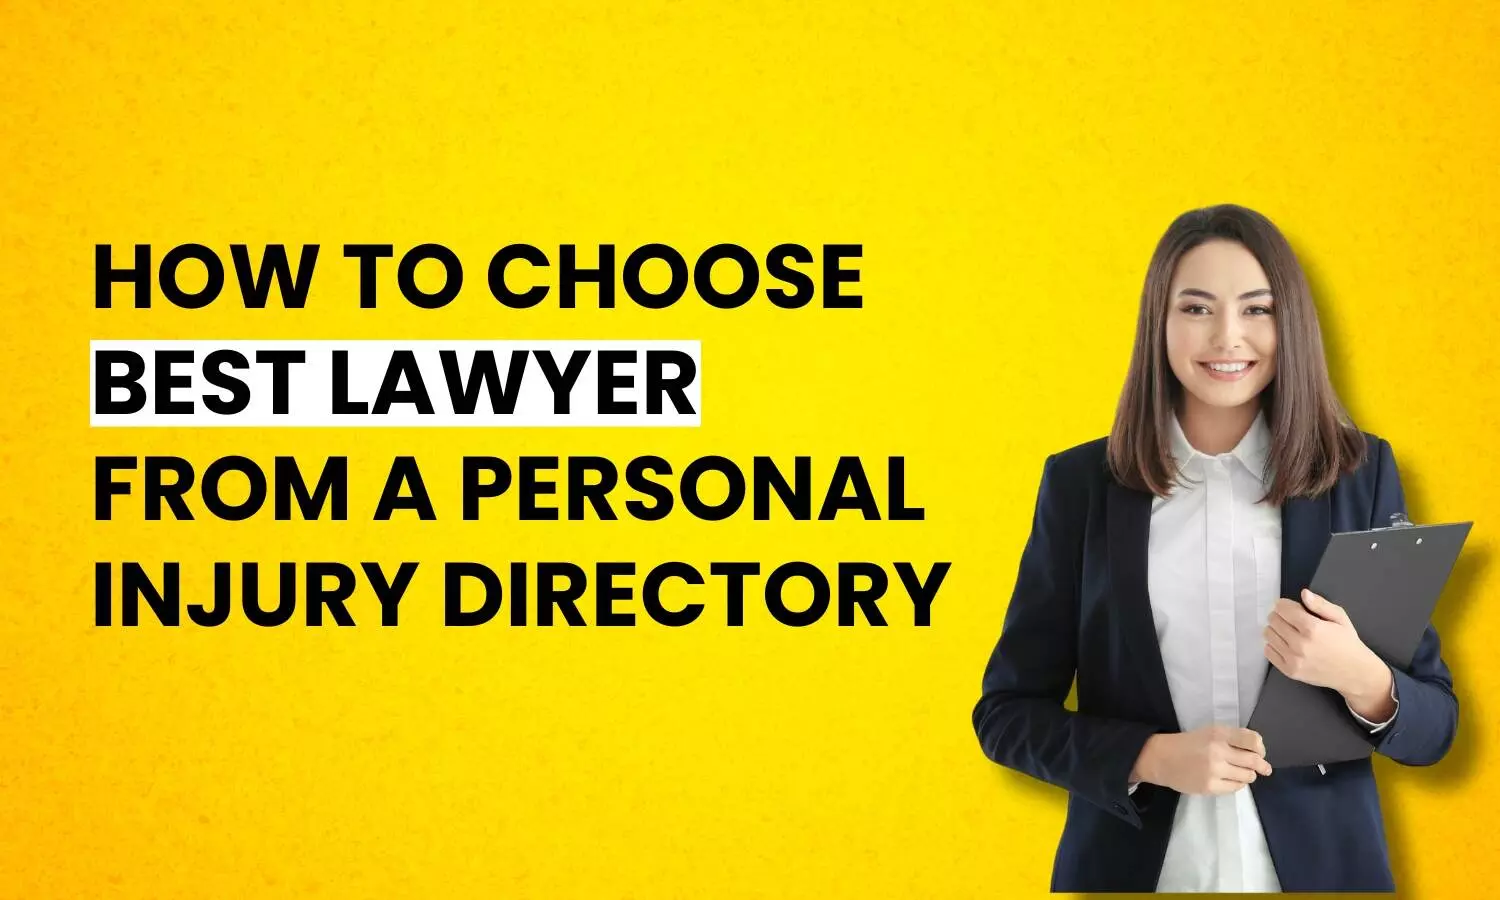 How to Choose the Best Lawyer from a Personal Injury Directory